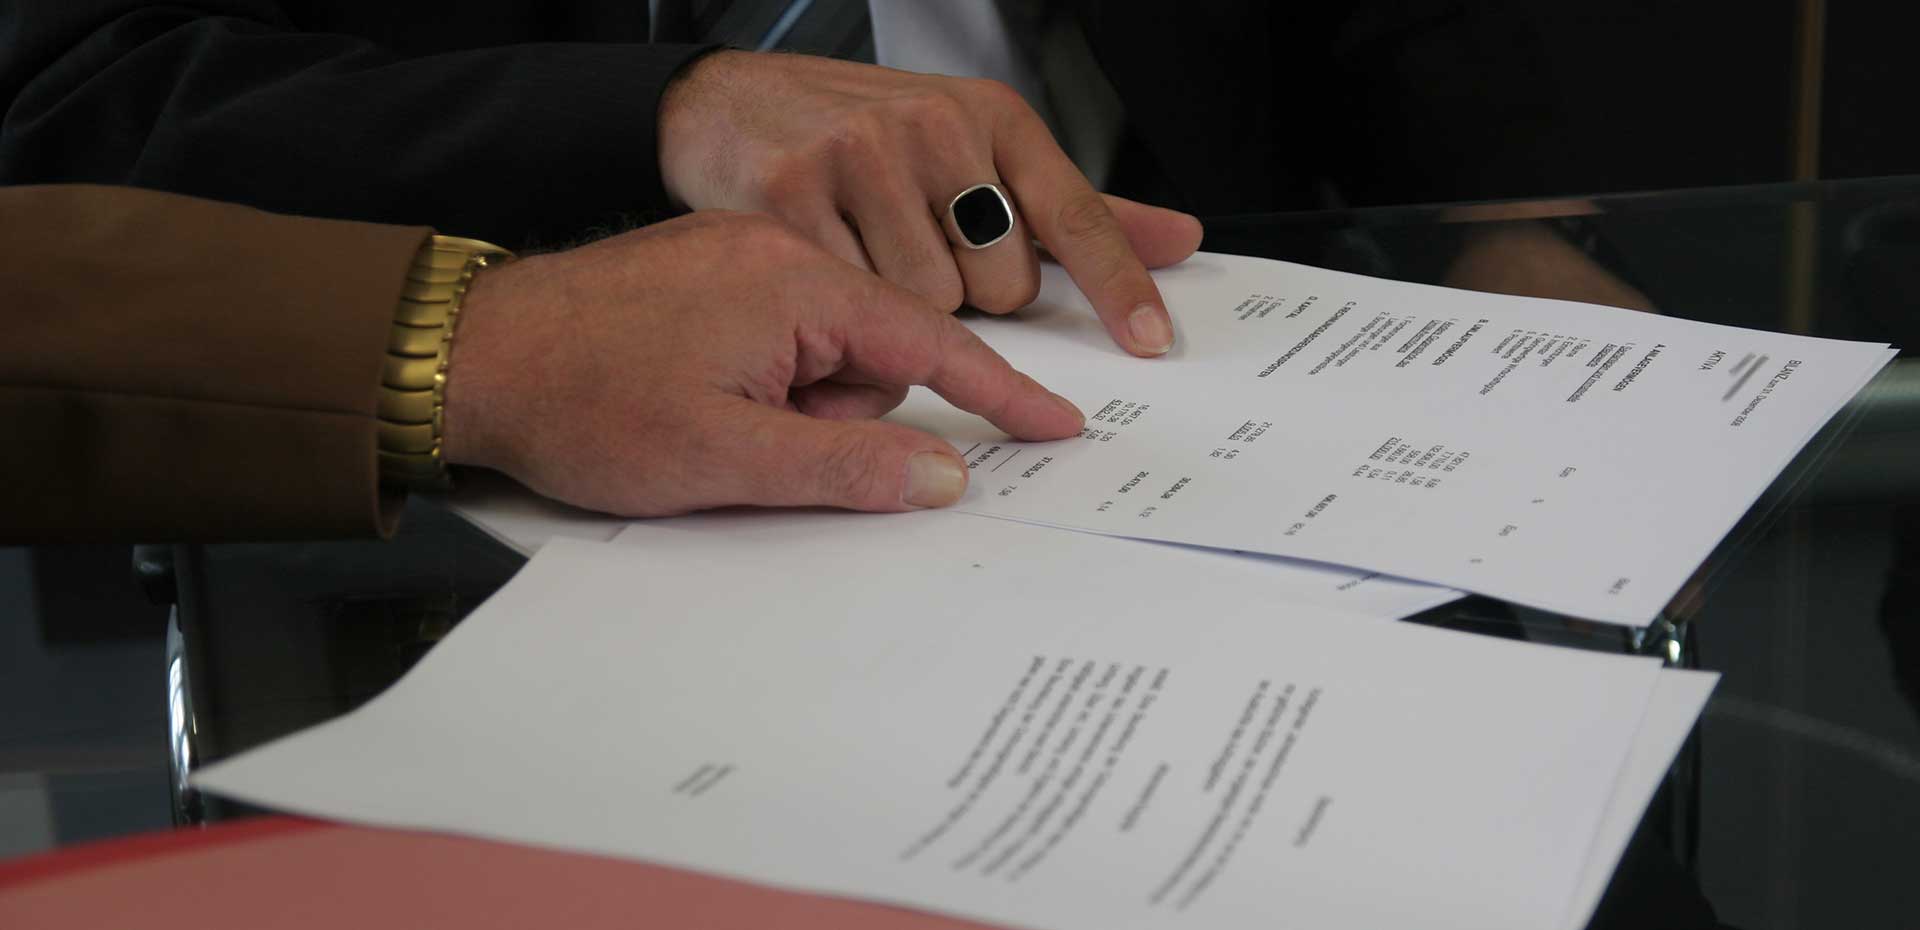 Image showing one hand of two different men pointing at items on profit and loss sheets